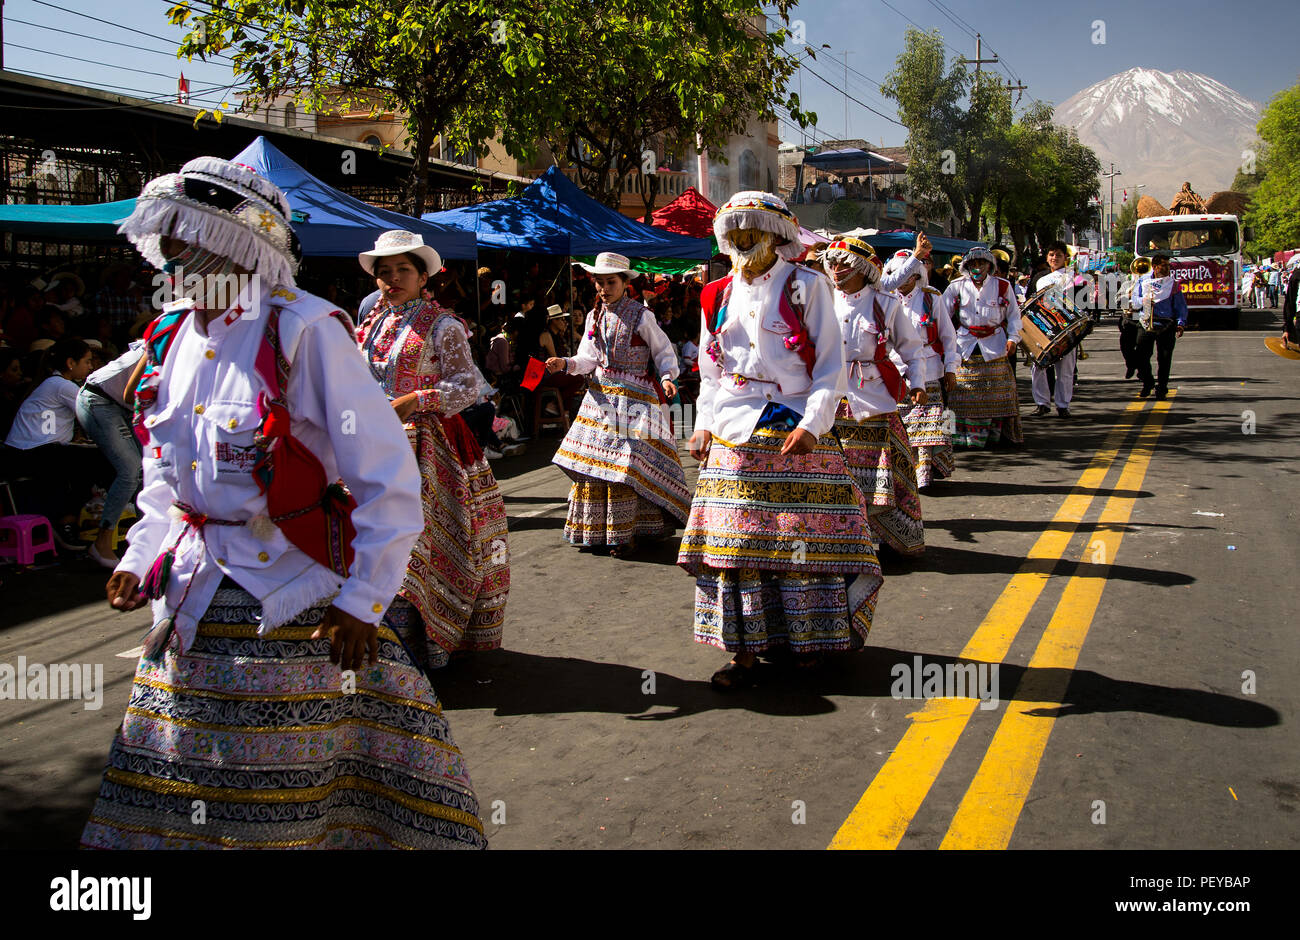 478th anniversary of Arequipa dancers from Chivay dancing the wititi dance celebrating the founding of Arequipa on Avenue Independancia Arequipa Stock Photo